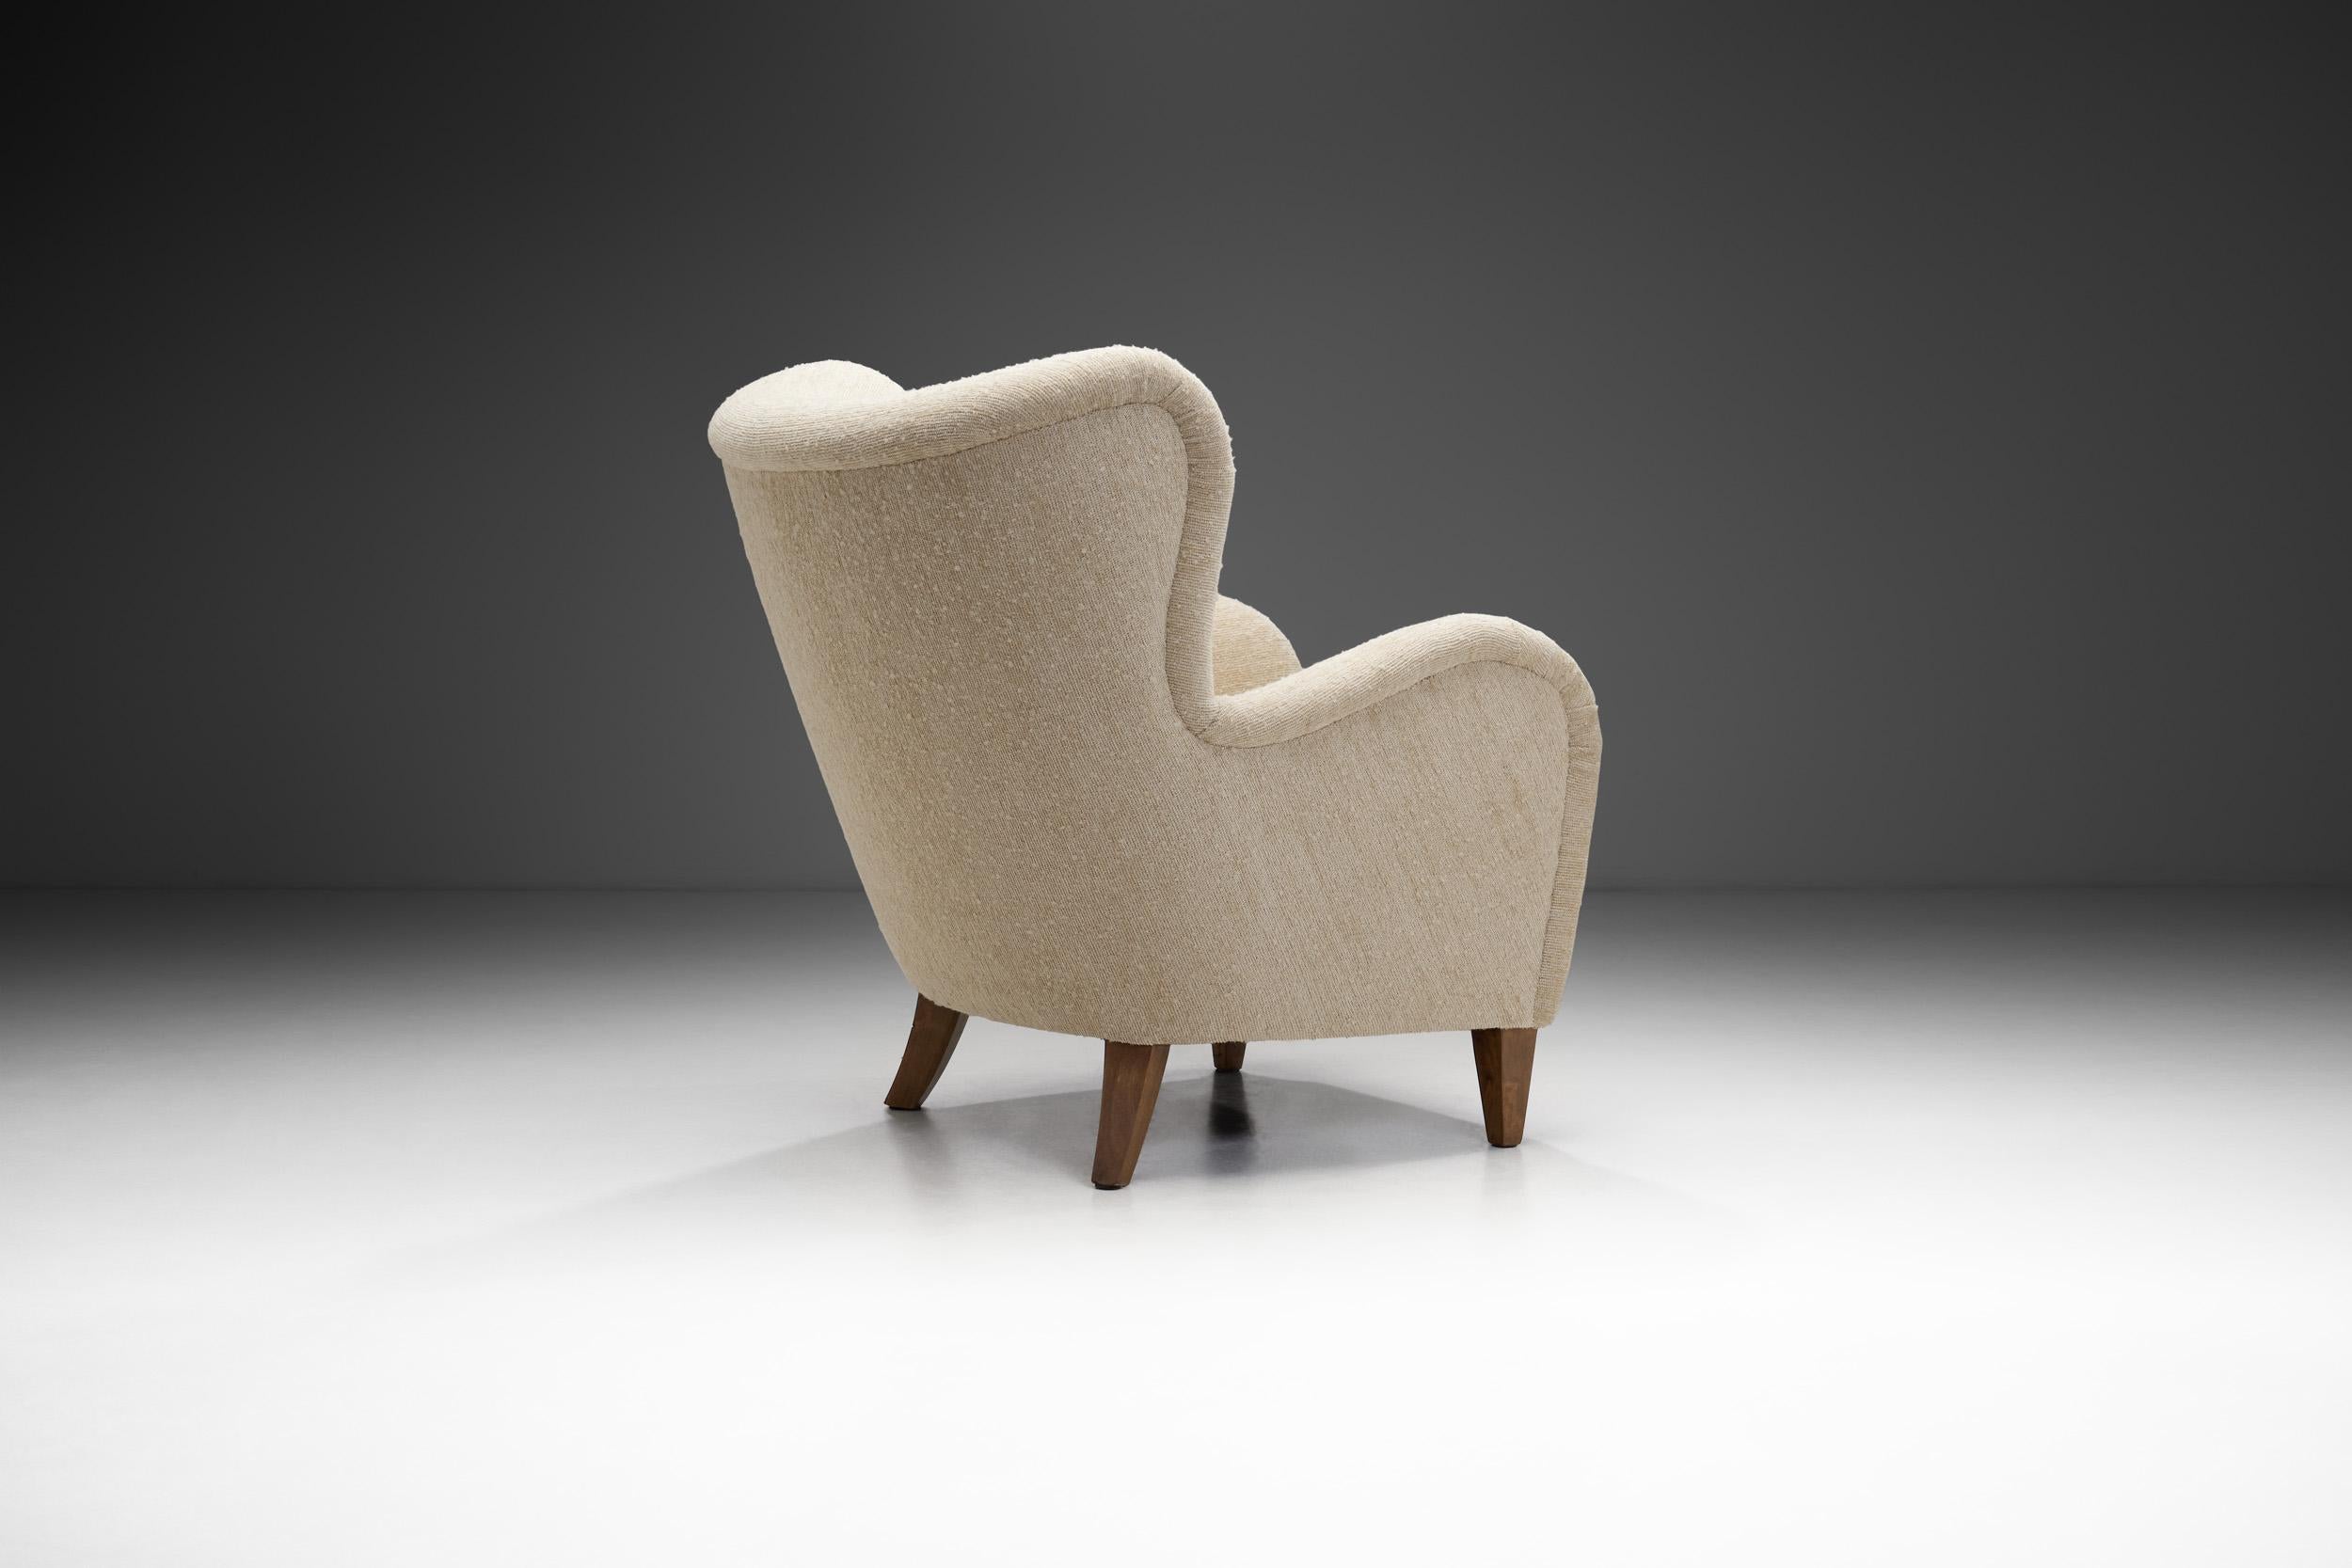 Mid-20th Century Finnish Mid-Century Upholstered Armchair, Finland ca 1950s For Sale